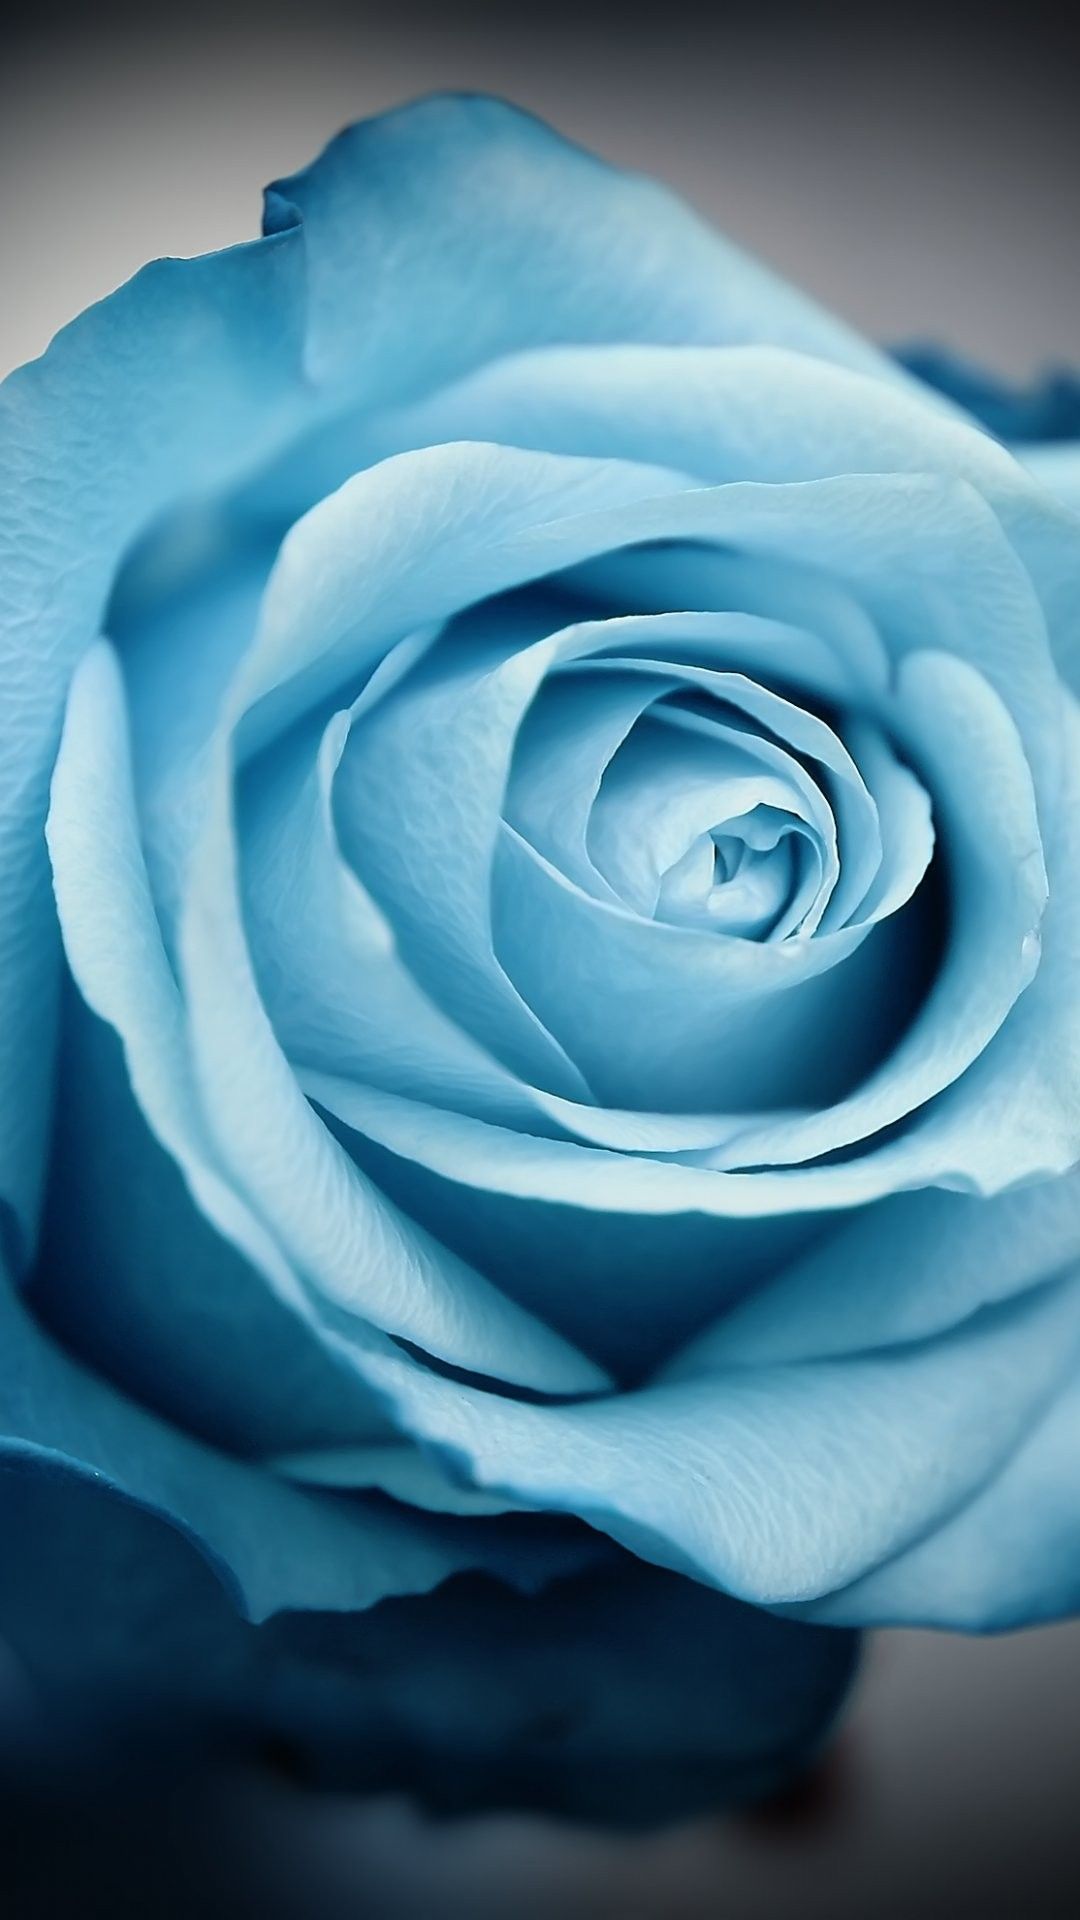 pretty wallpapers for iphone 6,rose,blue,flower,garden roses,petal